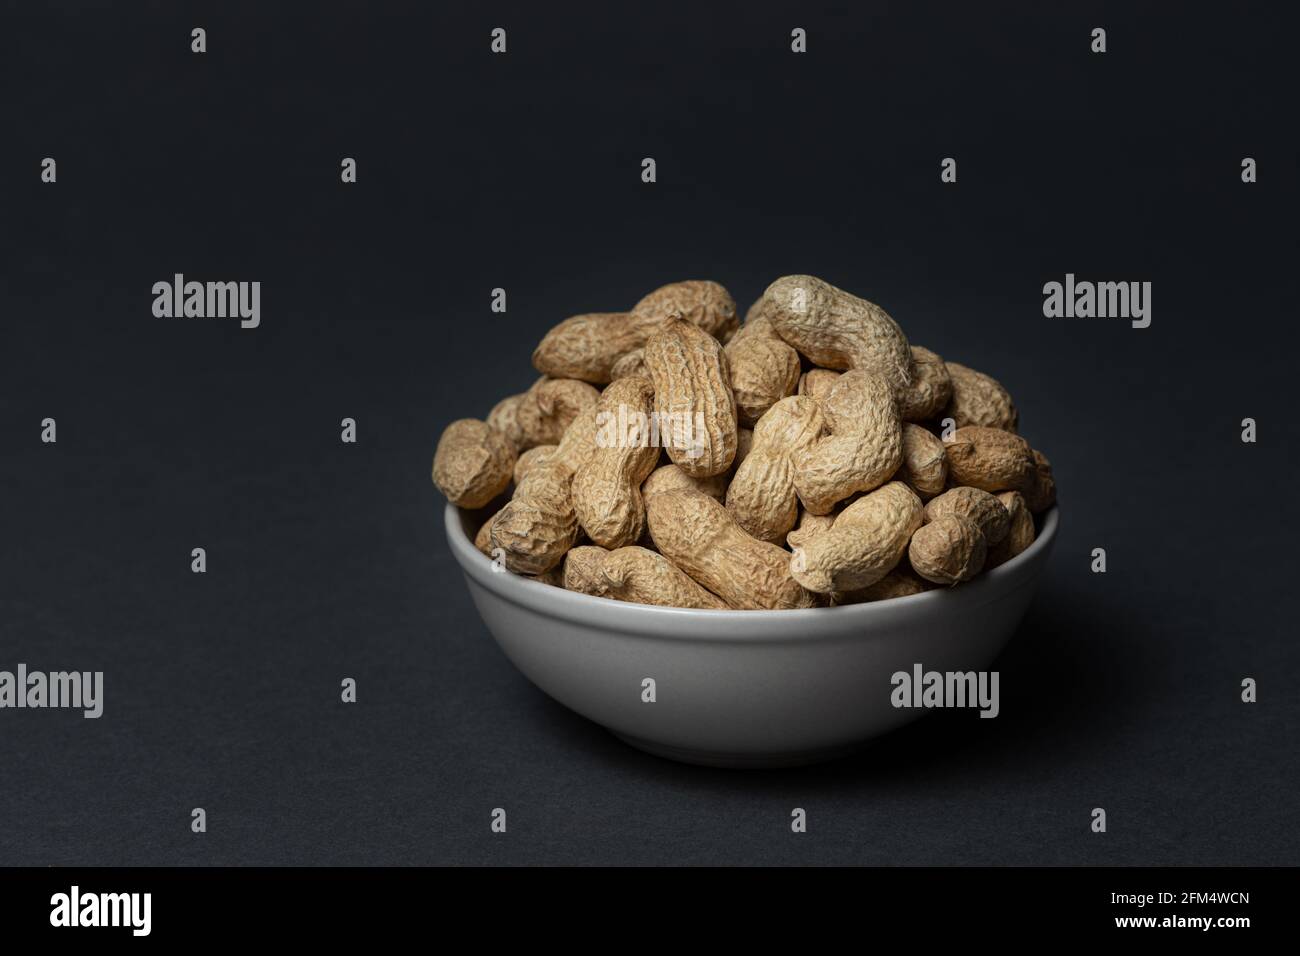 Unpeeled peanuts in bowl on dark background Stock Photo